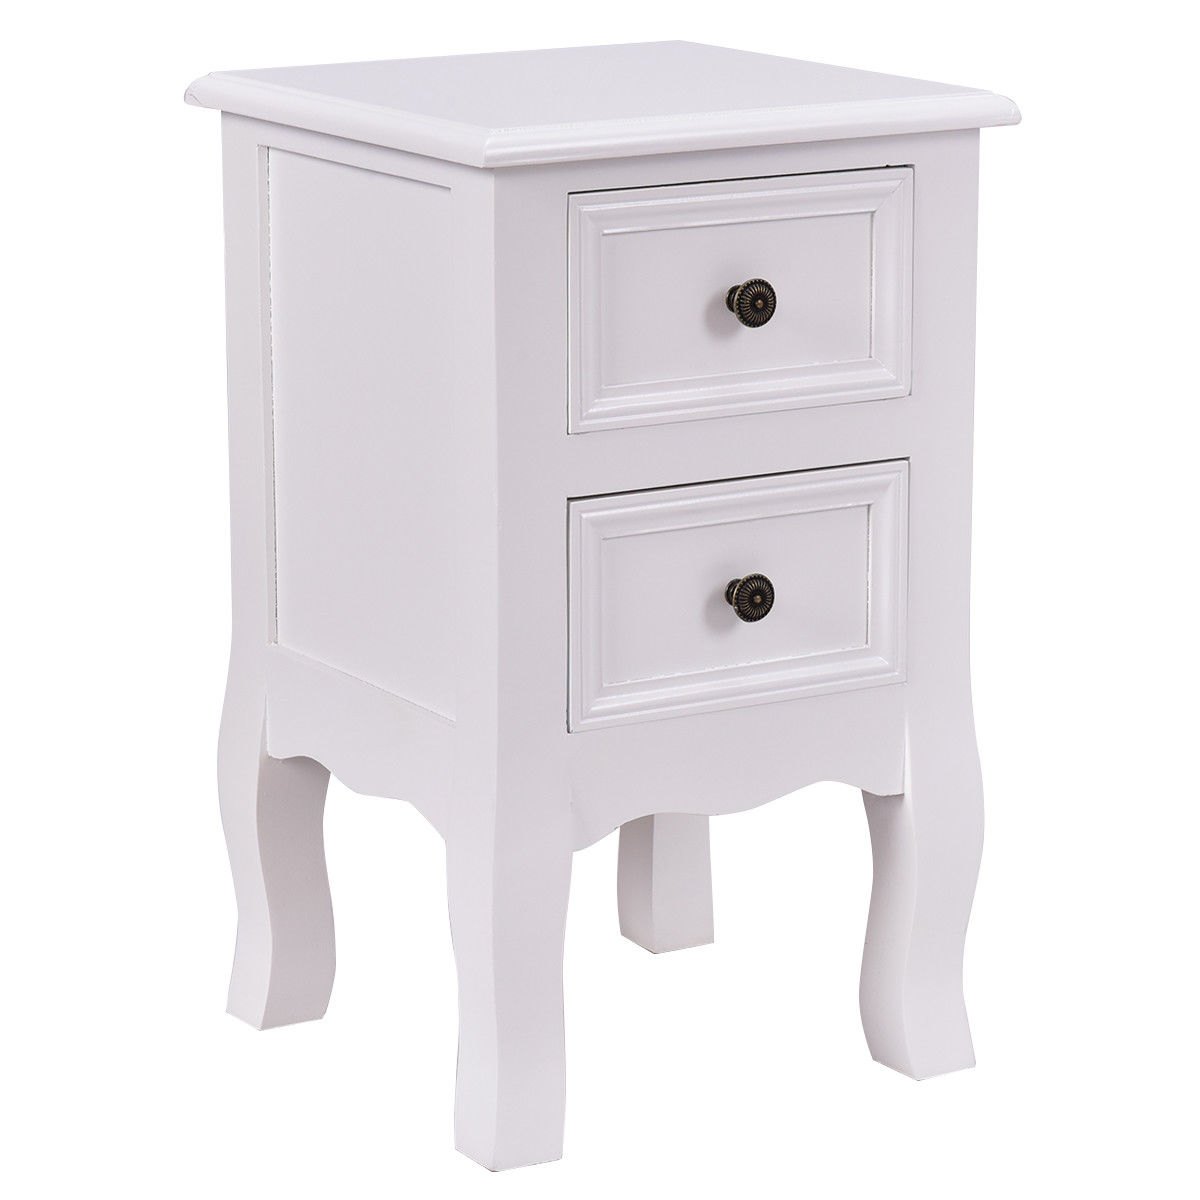 way white night stand storage drawers wood end accent table with burgundy runner reasonably furniture kitchen tama drum stool mirrored coffee hairpin leg small half moon hall